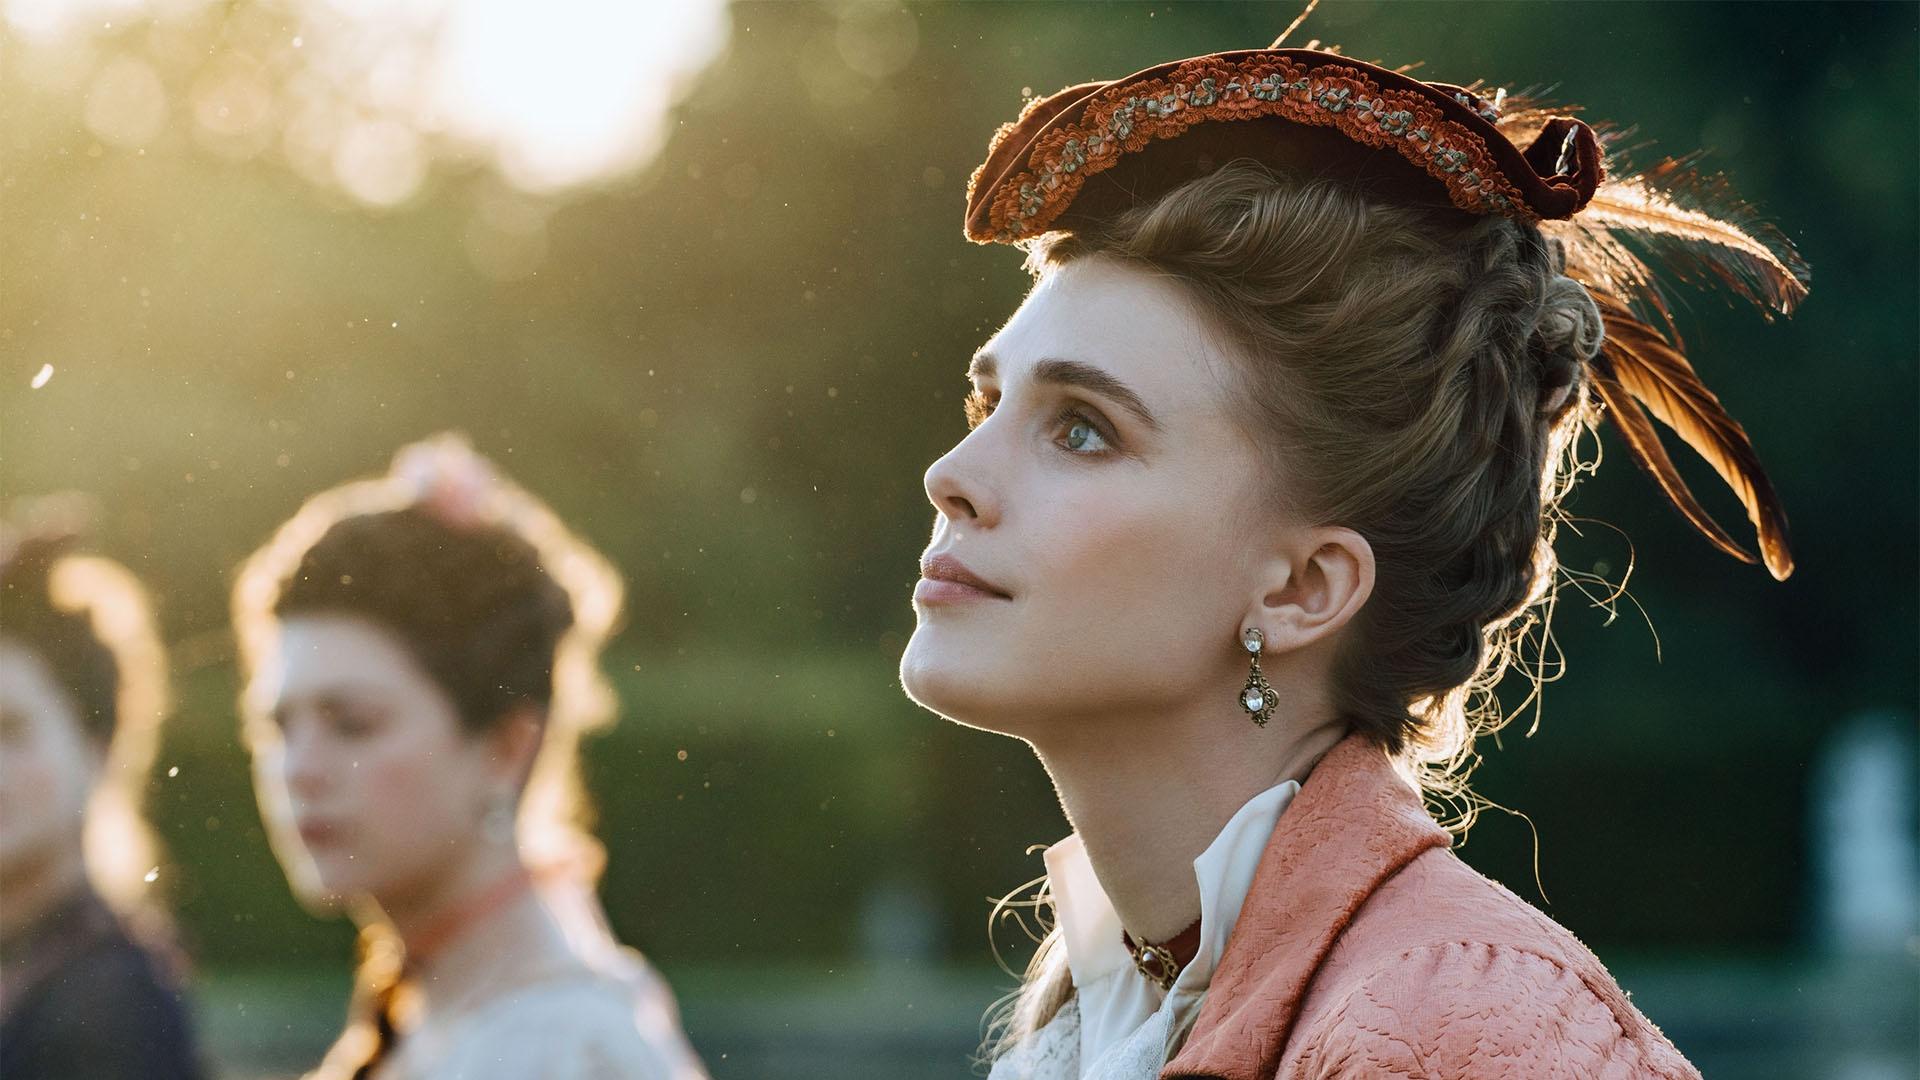 Image of Madame Du Barry played by actress Gaia Weiss